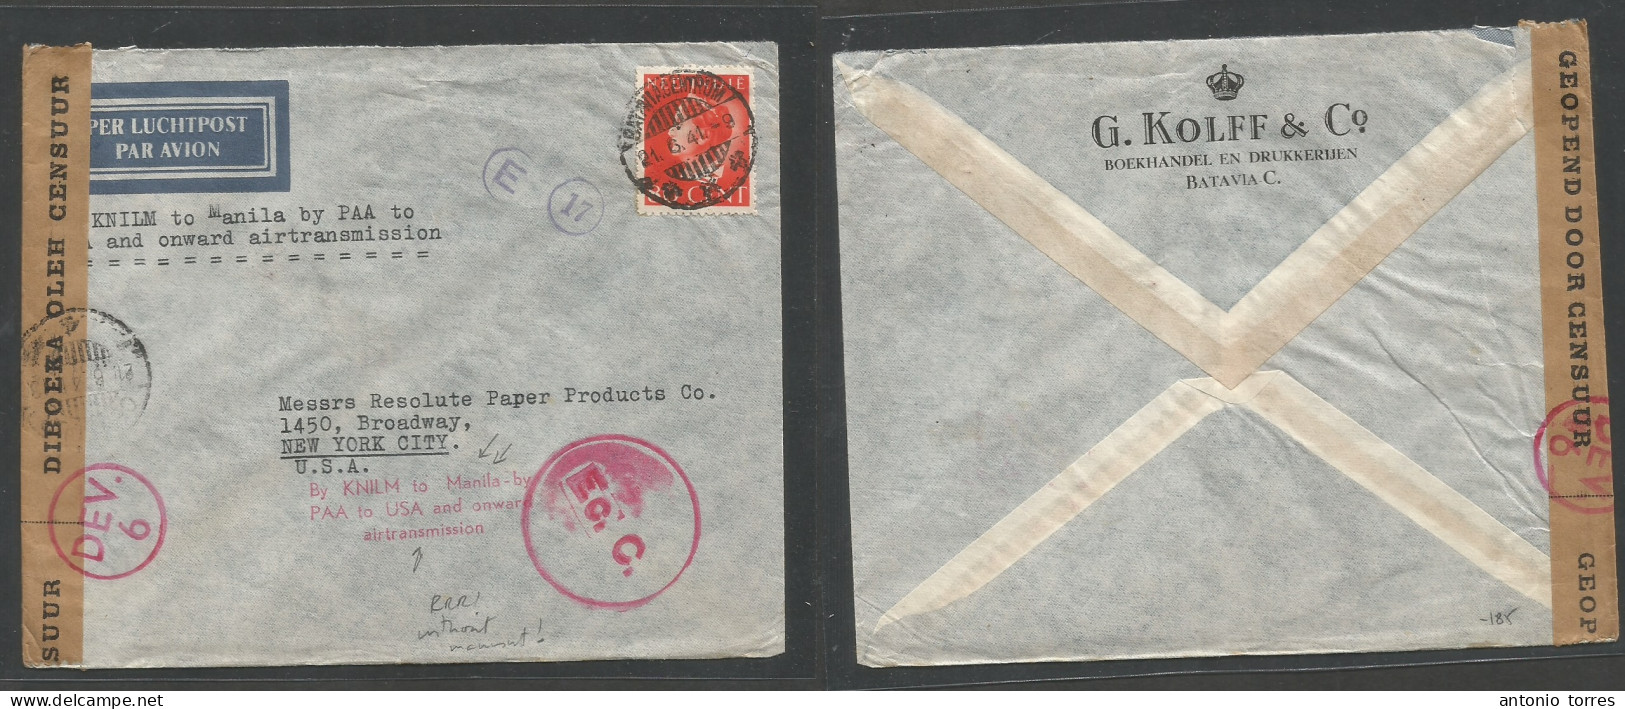 Dutch Indies. 1941 (21 June) Batavia - USA, NYC. Single 80c Red Fkd Air Comercial Envelope, Depart Censored + Route KNIL - Netherlands Indies